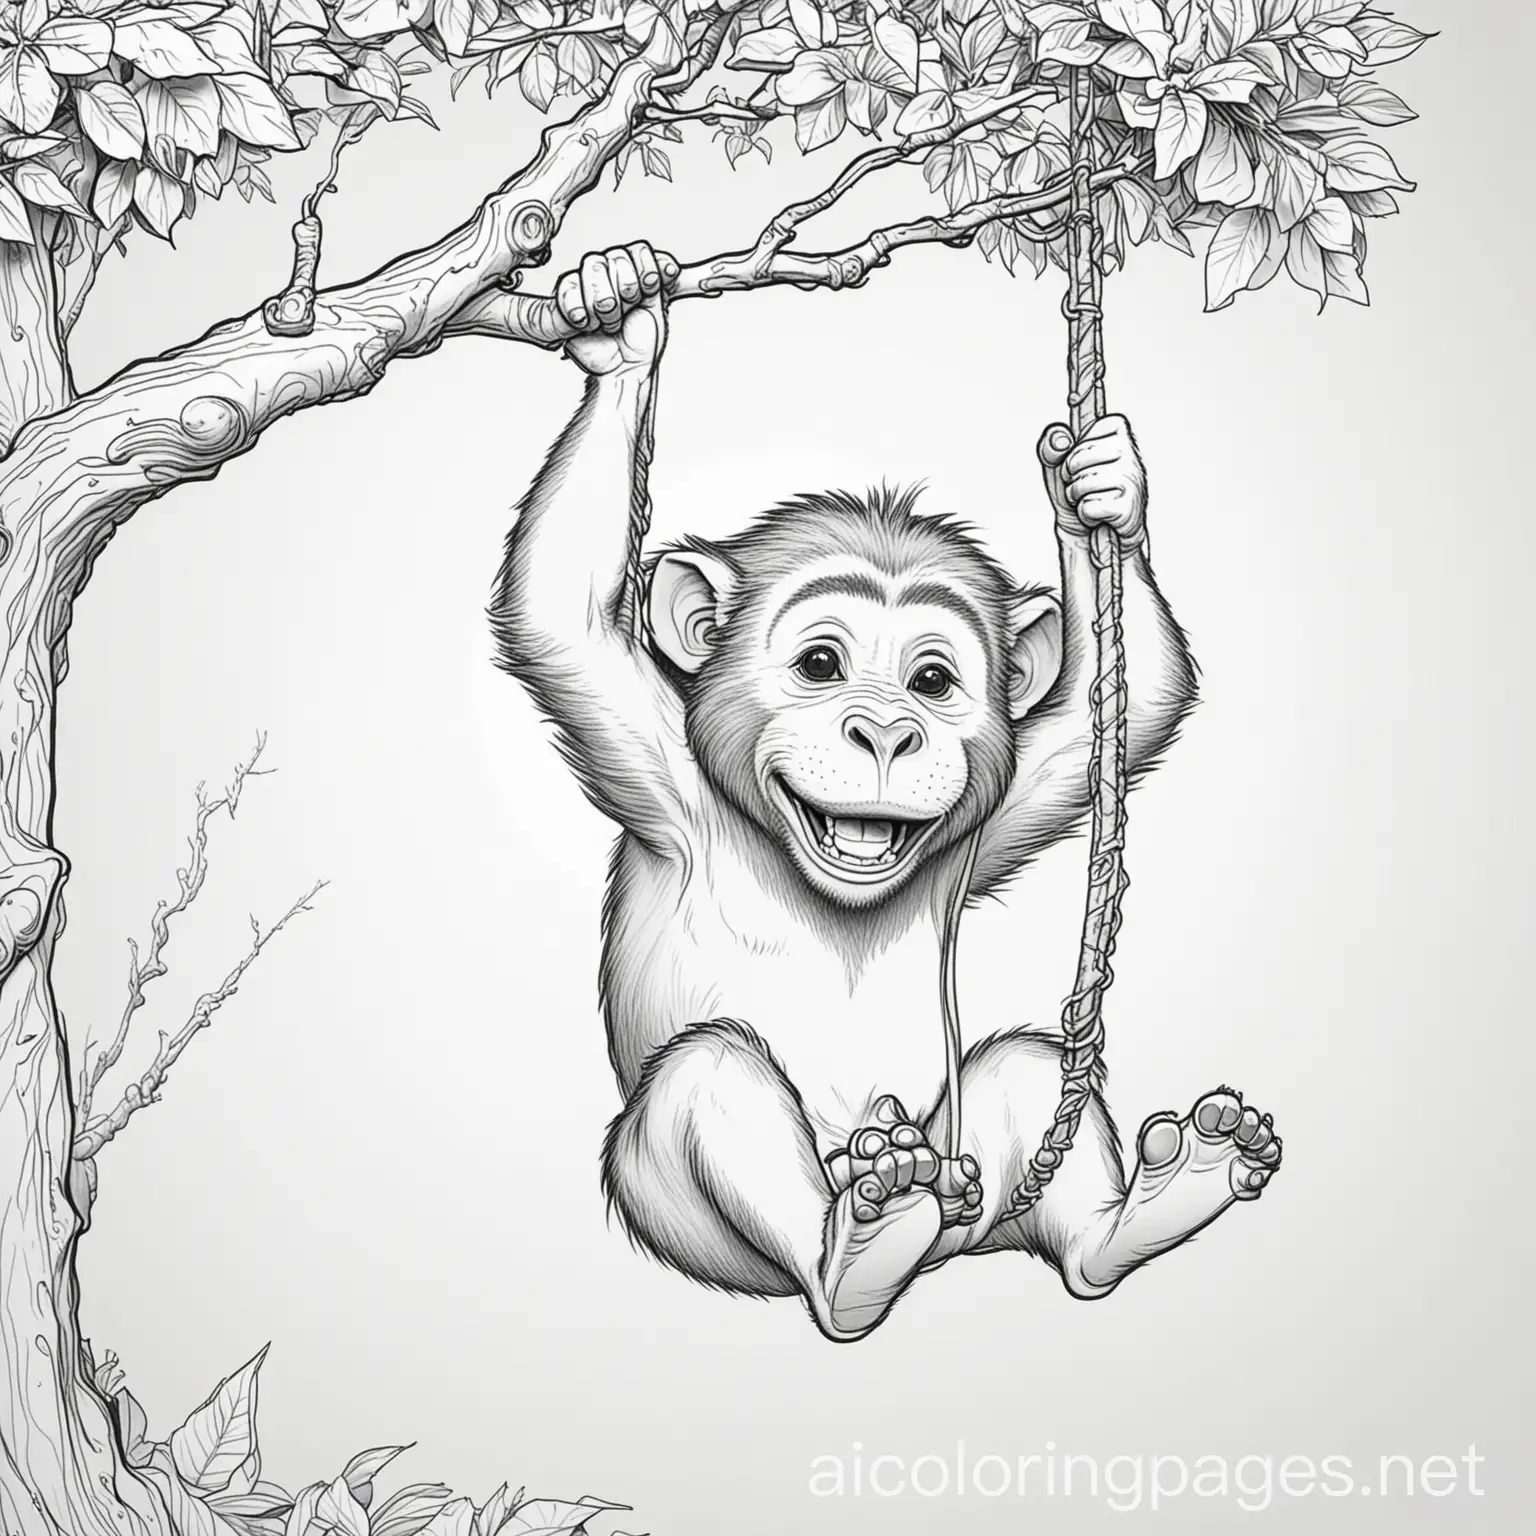 Cheerful-Baboon-Swinging-from-a-Tree-Coloring-Page-for-Kids